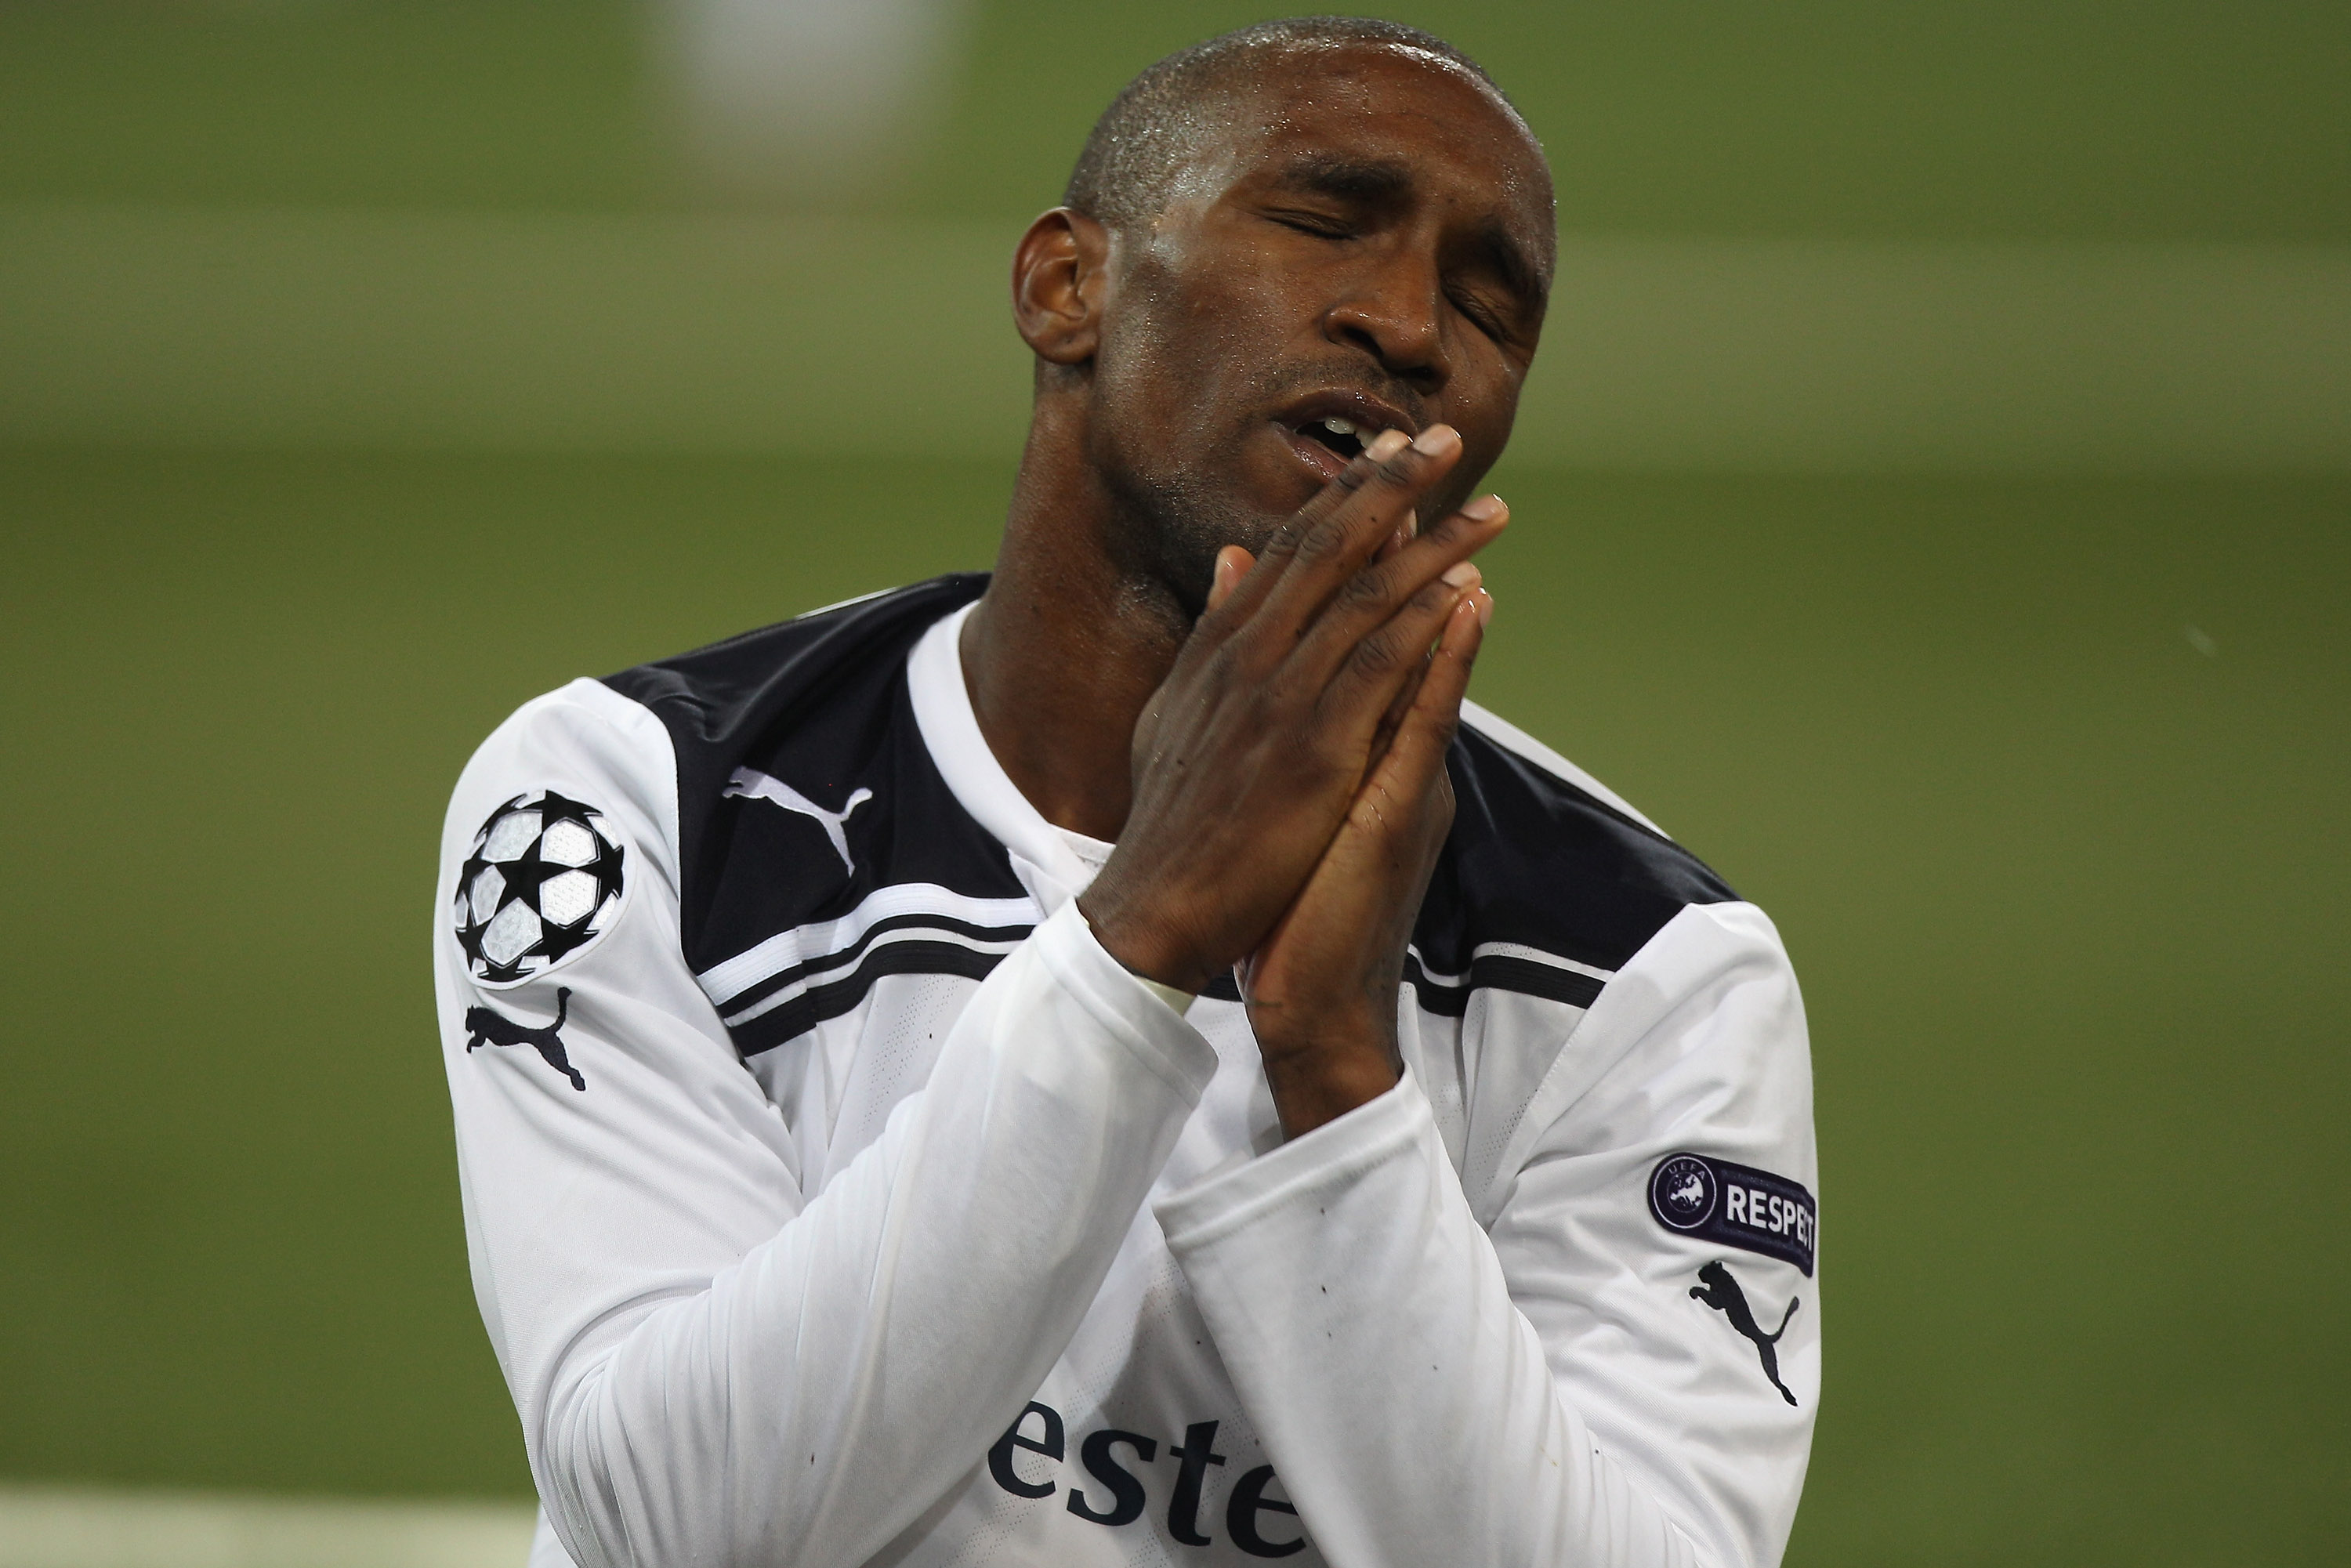 BERNE, SWITZERLAND - AUGUST 17:  Jermain Defoe of Tottenham rues a missed chance during the UEFA Champions League Play-Off first leg match between BSC Young Boys and Tottenham Hotspur at the Stade de Suisse on August 17, 2010 in Berne, Switzerland.  (Phot